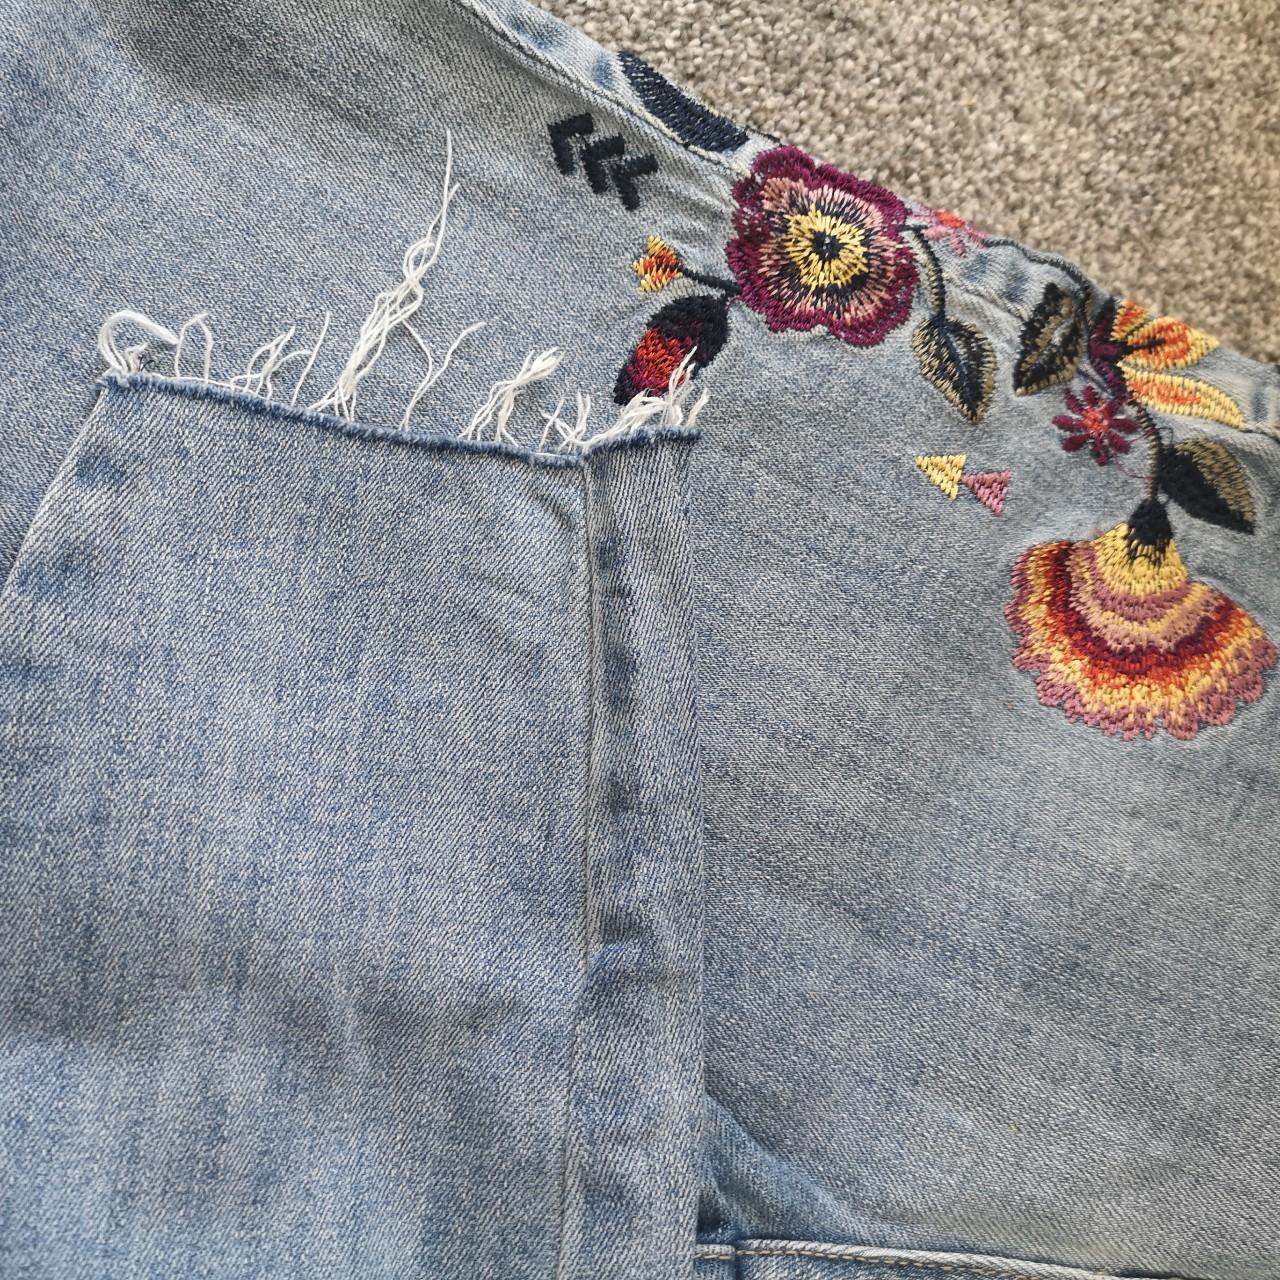 Earl Jeans size 10 with cute embroidered flowers on - Depop